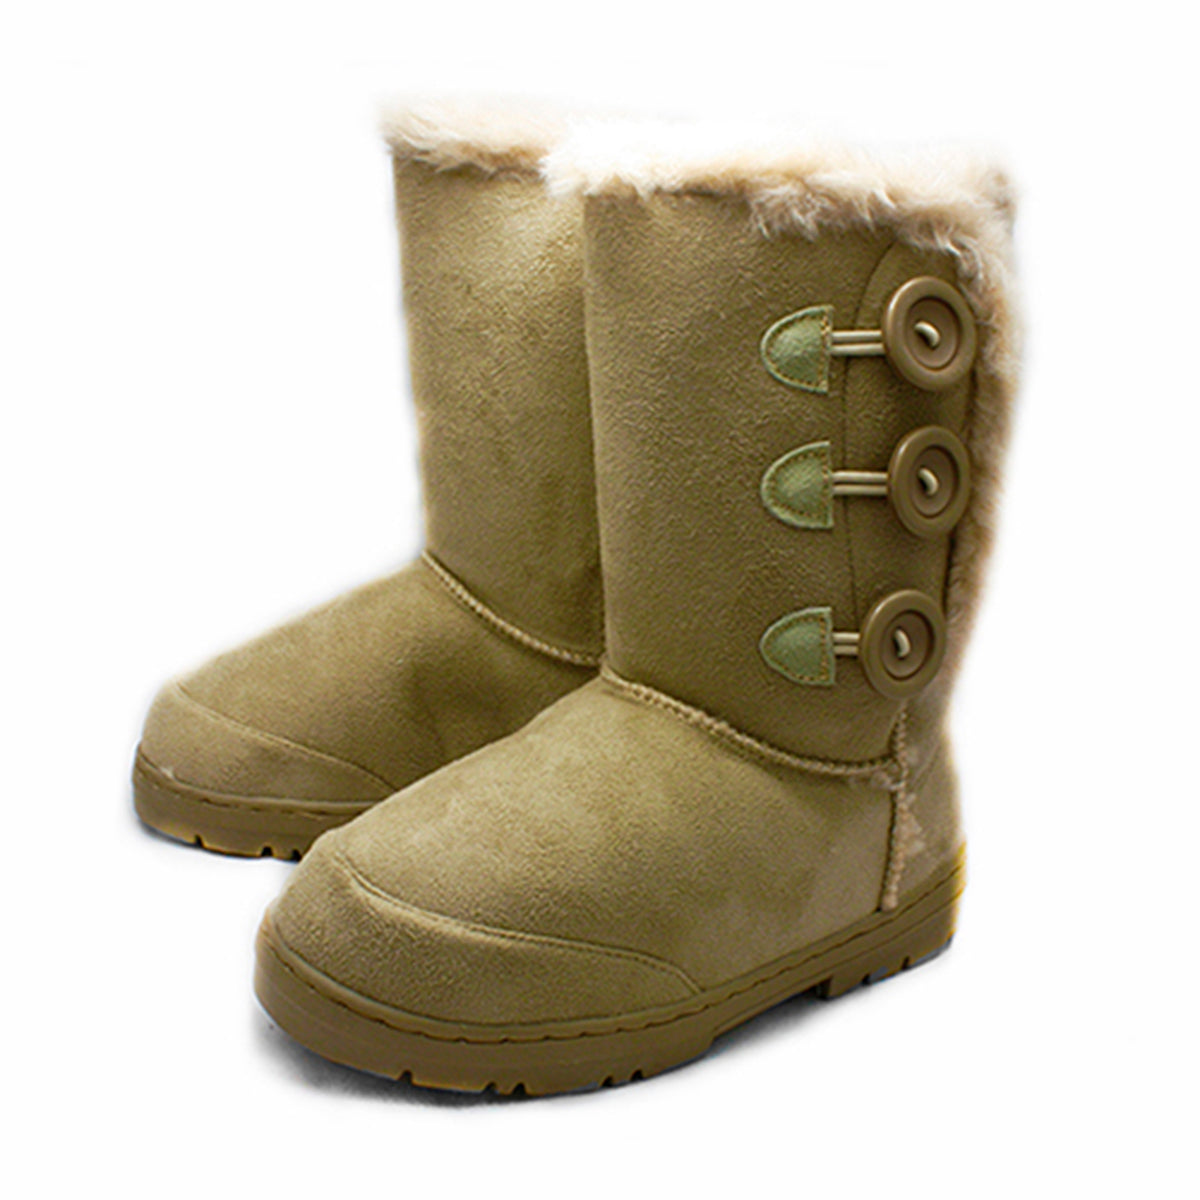 Beige Fur lined flat calf length large side button boots